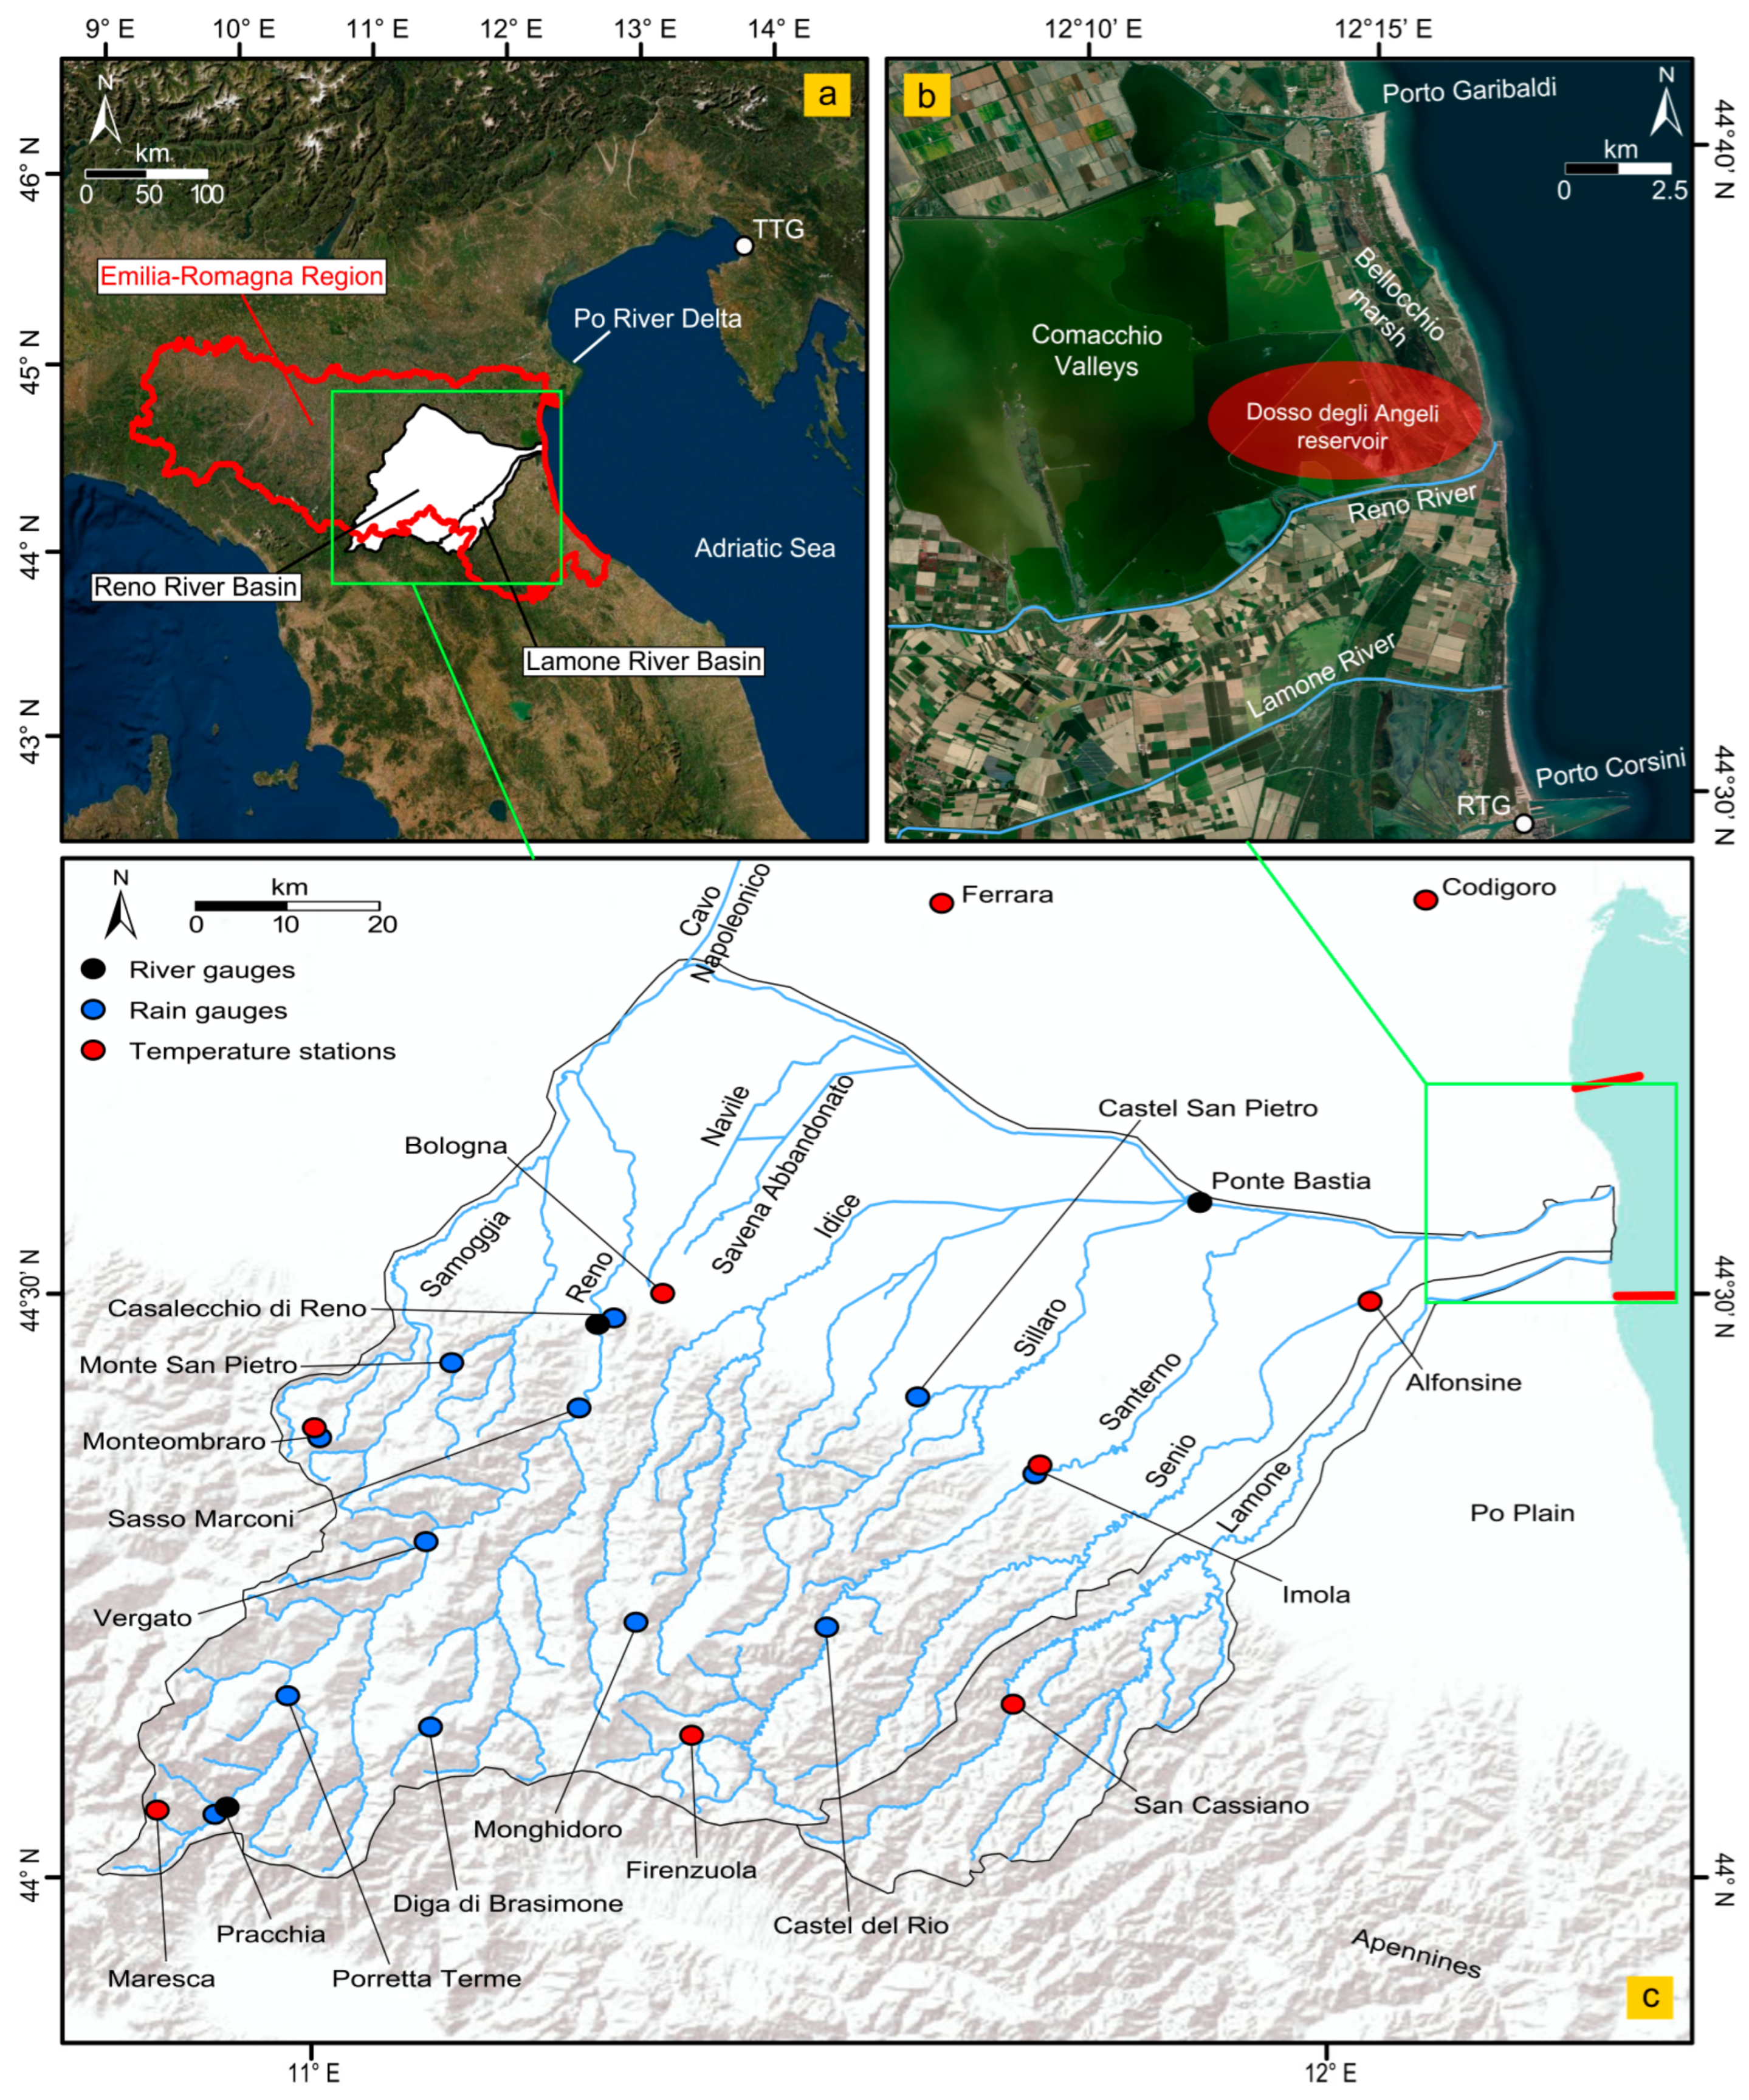 Water | Free Full-Text | Evidence and Implications of Hydrological and  Climatic Change in the Reno and Lamone River Basins and Related Coastal  Areas (Emilia-Romagna, Northern Italy) over the Last Century